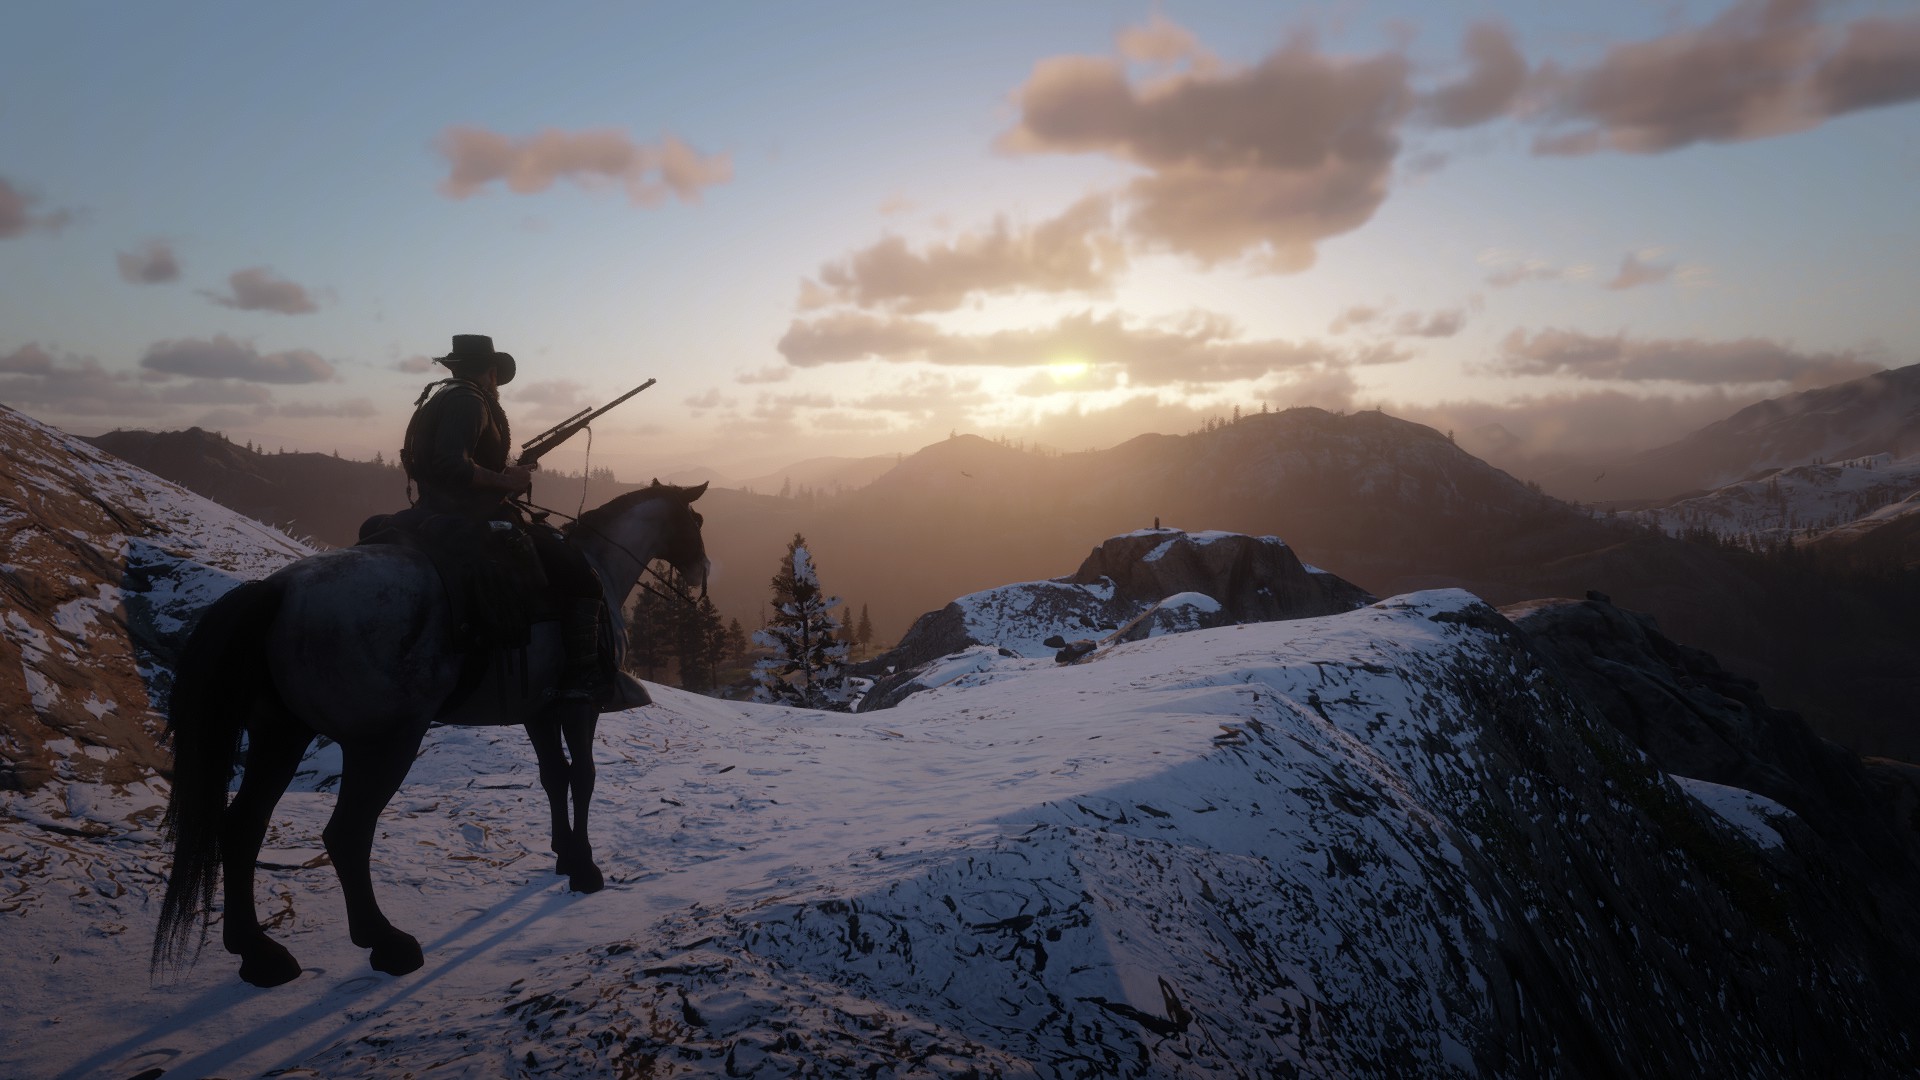 General 1920x1080 Red Dead Redemption 2 PC gaming cowboy western horse screen shot video game art snow sunrise mountains nature